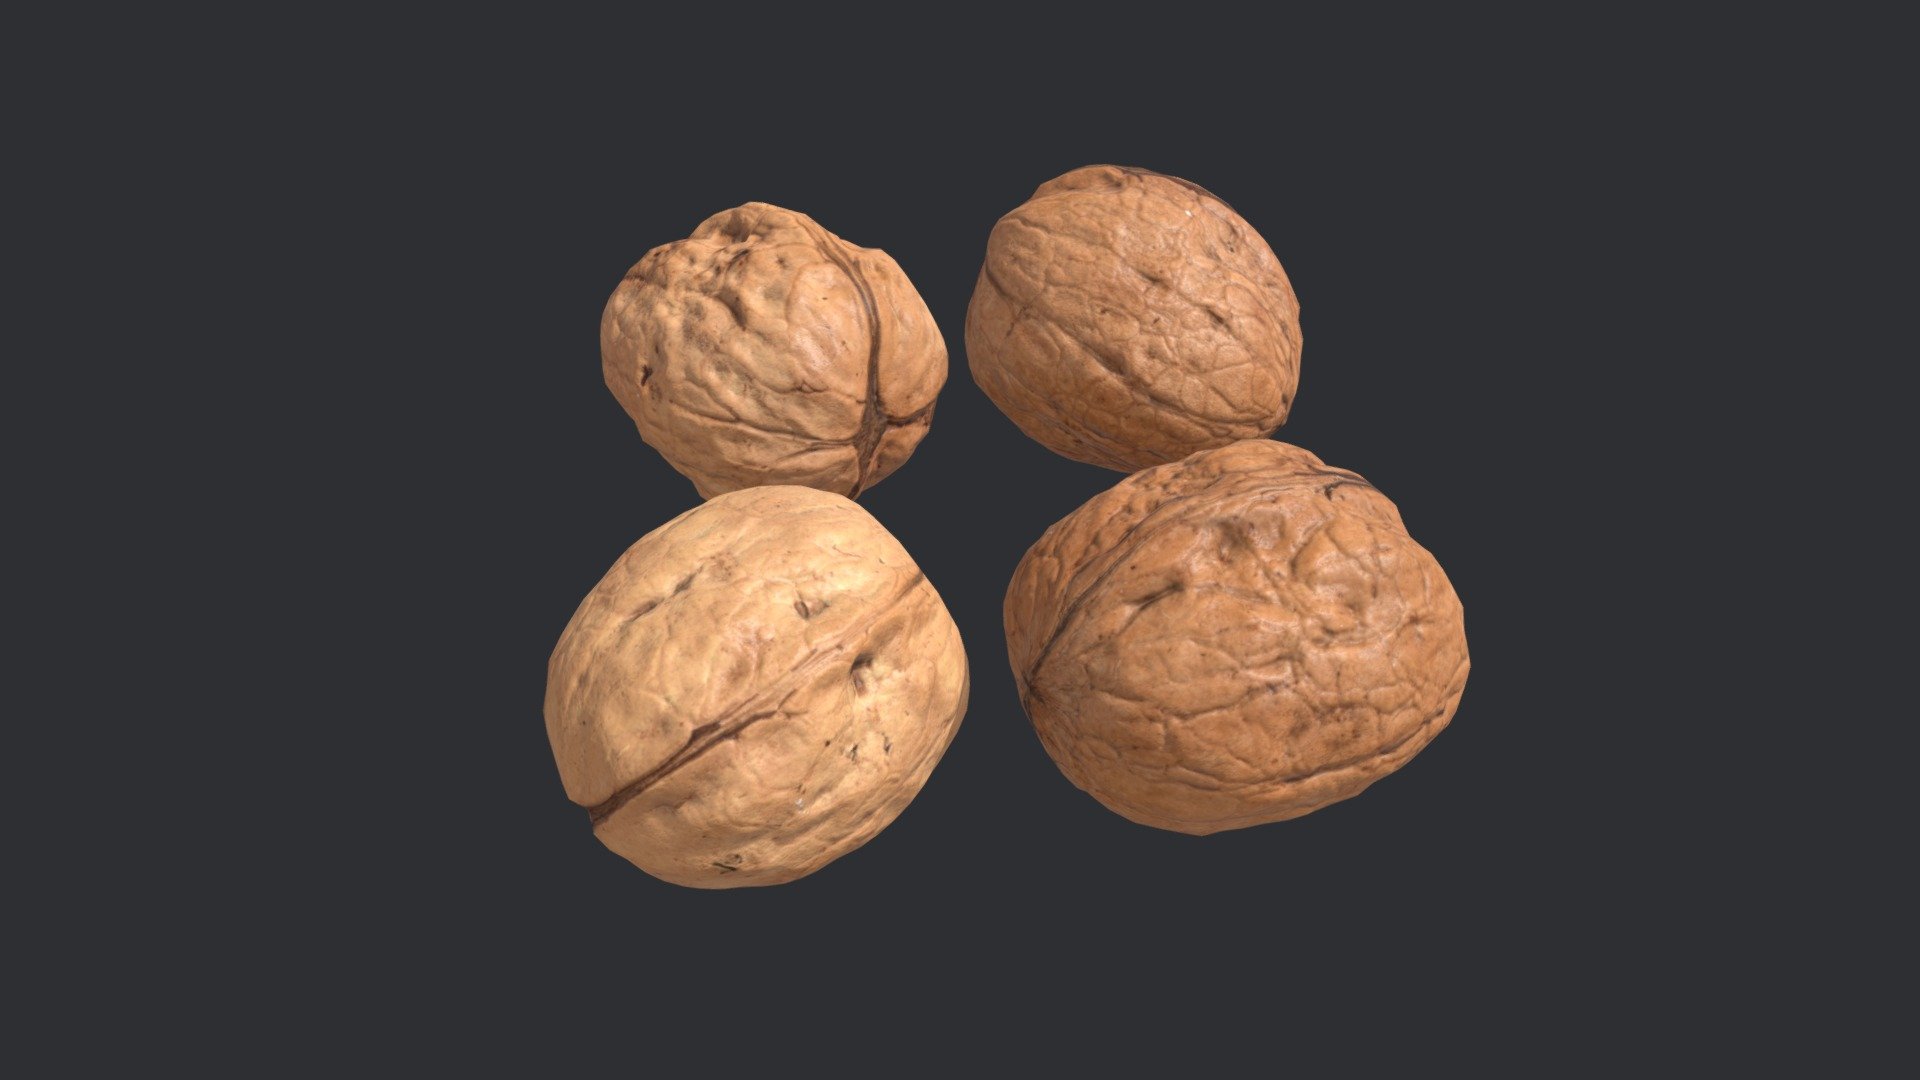 Photogrammetry model of four individual unshelled walnuts.

Each model has three base levels of detail, optimized into uniform triangles with clean UVs.

Lod 1 = 32,000 tris,

Lod 2 = 2,000 tris,

Lod 3 = 500 tris.

The models have 4K PNG textures (Albedo, Normal, Ambient Occlusion, Roughness and Gloss). All levels of detail share the same textures except for the Normal, where each LOD has a unique Normal map.

Lod 2 used for 3D preview with 1K JPG textures.

Real world scale 3d model